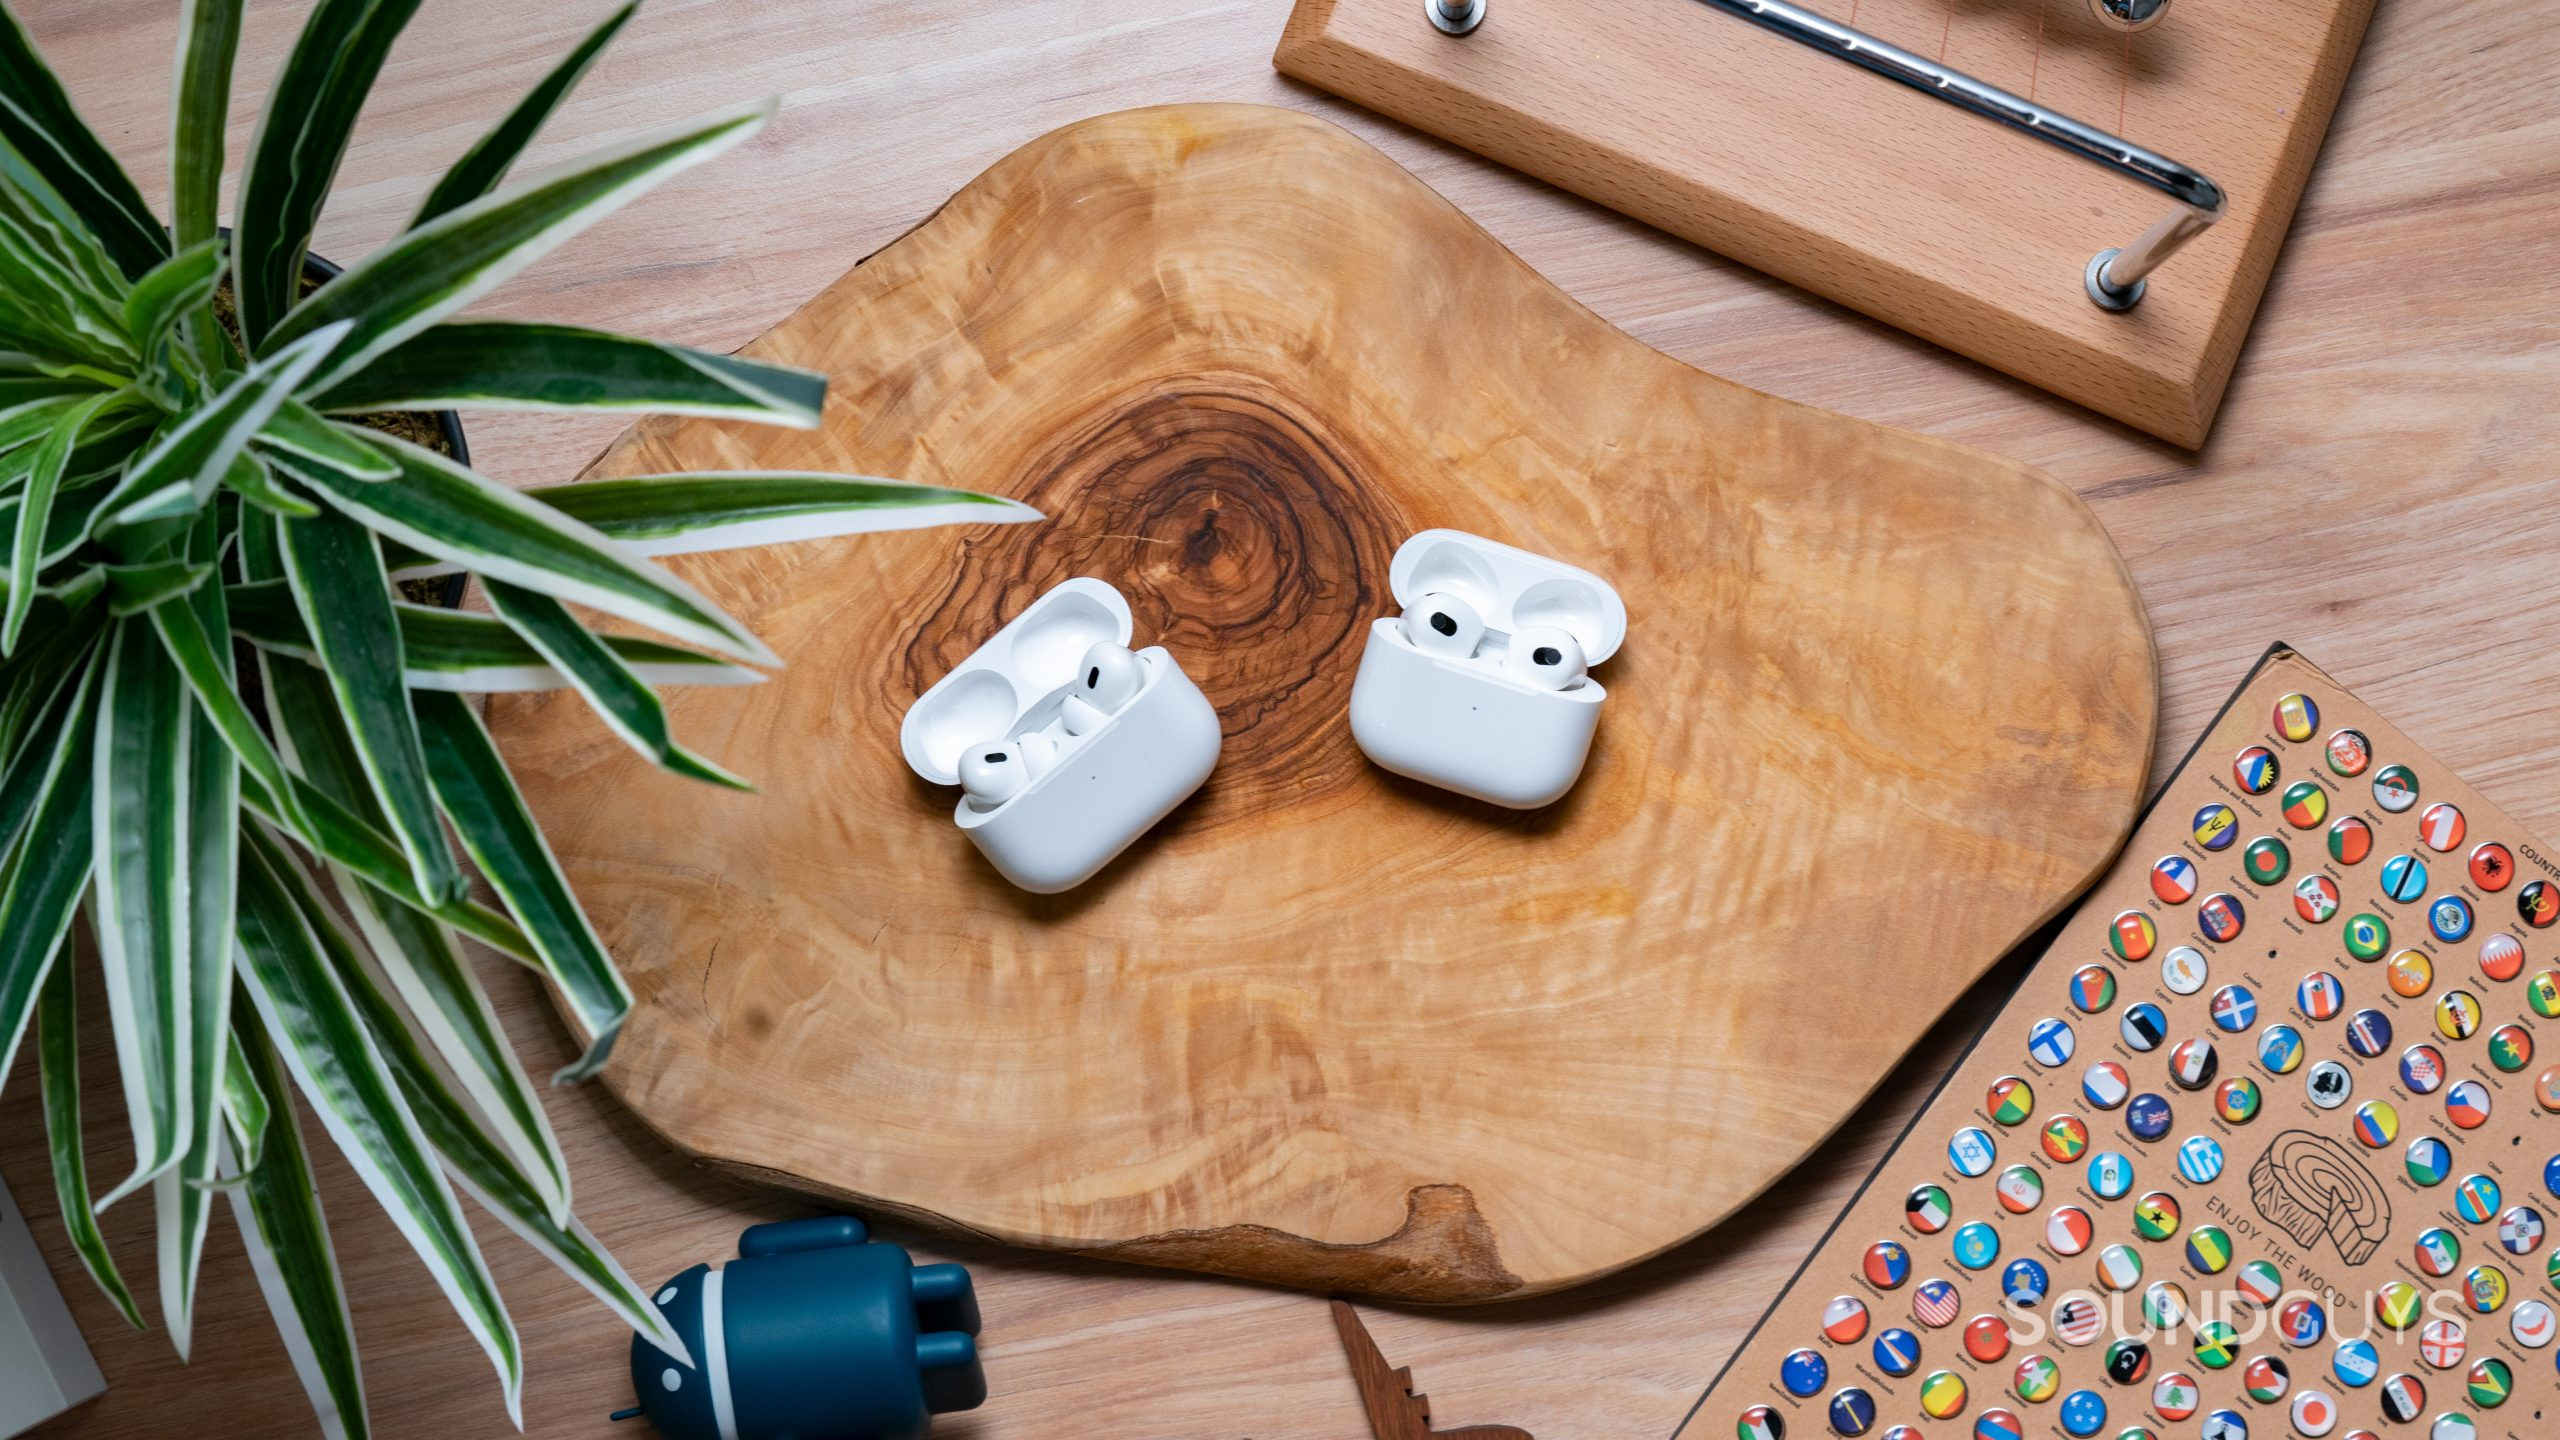 The Apple AirPods Pro Gen 2 and the Apple AirPods Gen 3 sitting across from each other with their cases open on top of a wooden surface.